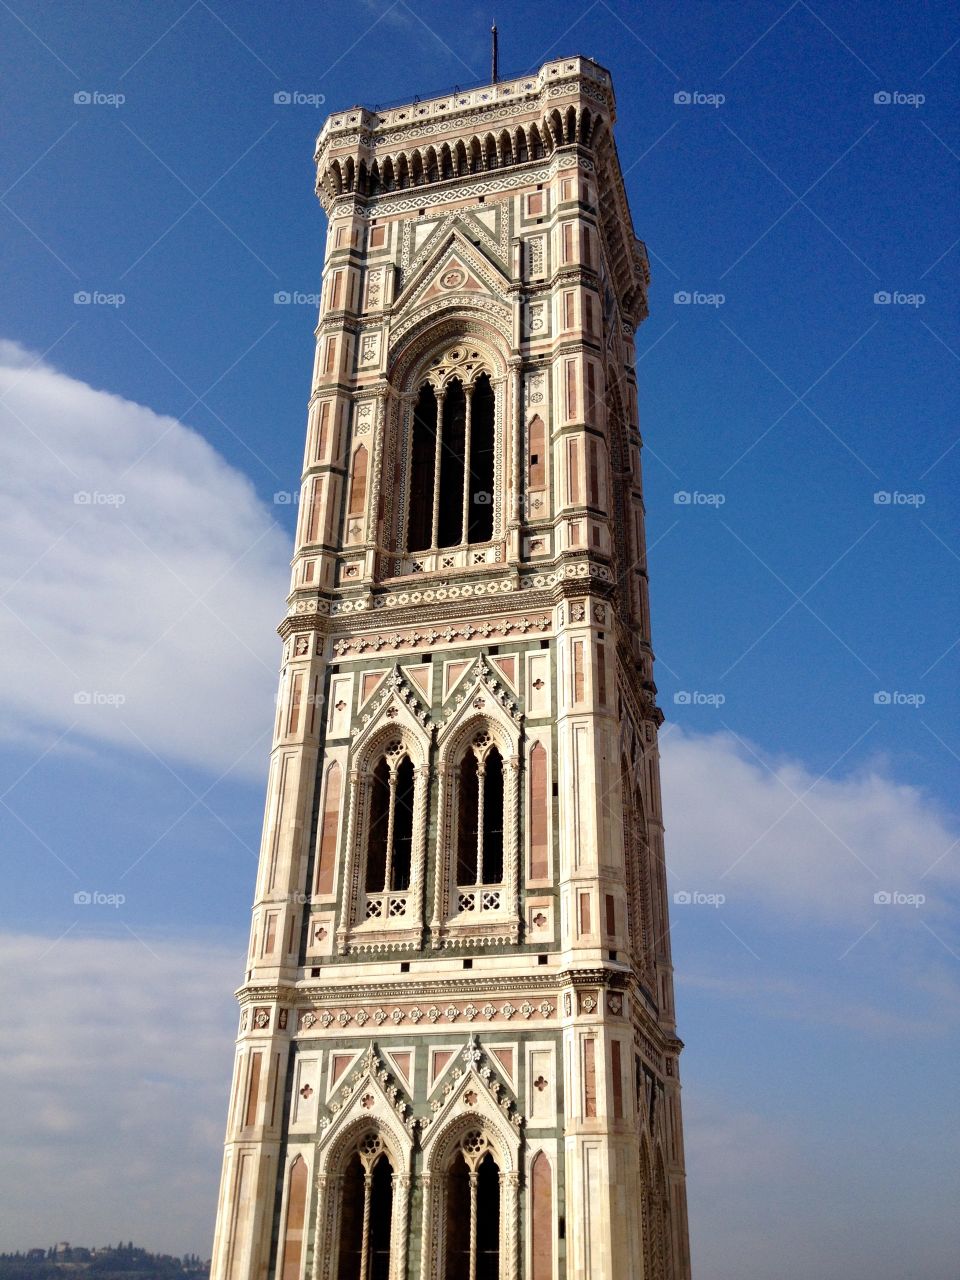 The campanile of Florence cathedral complex